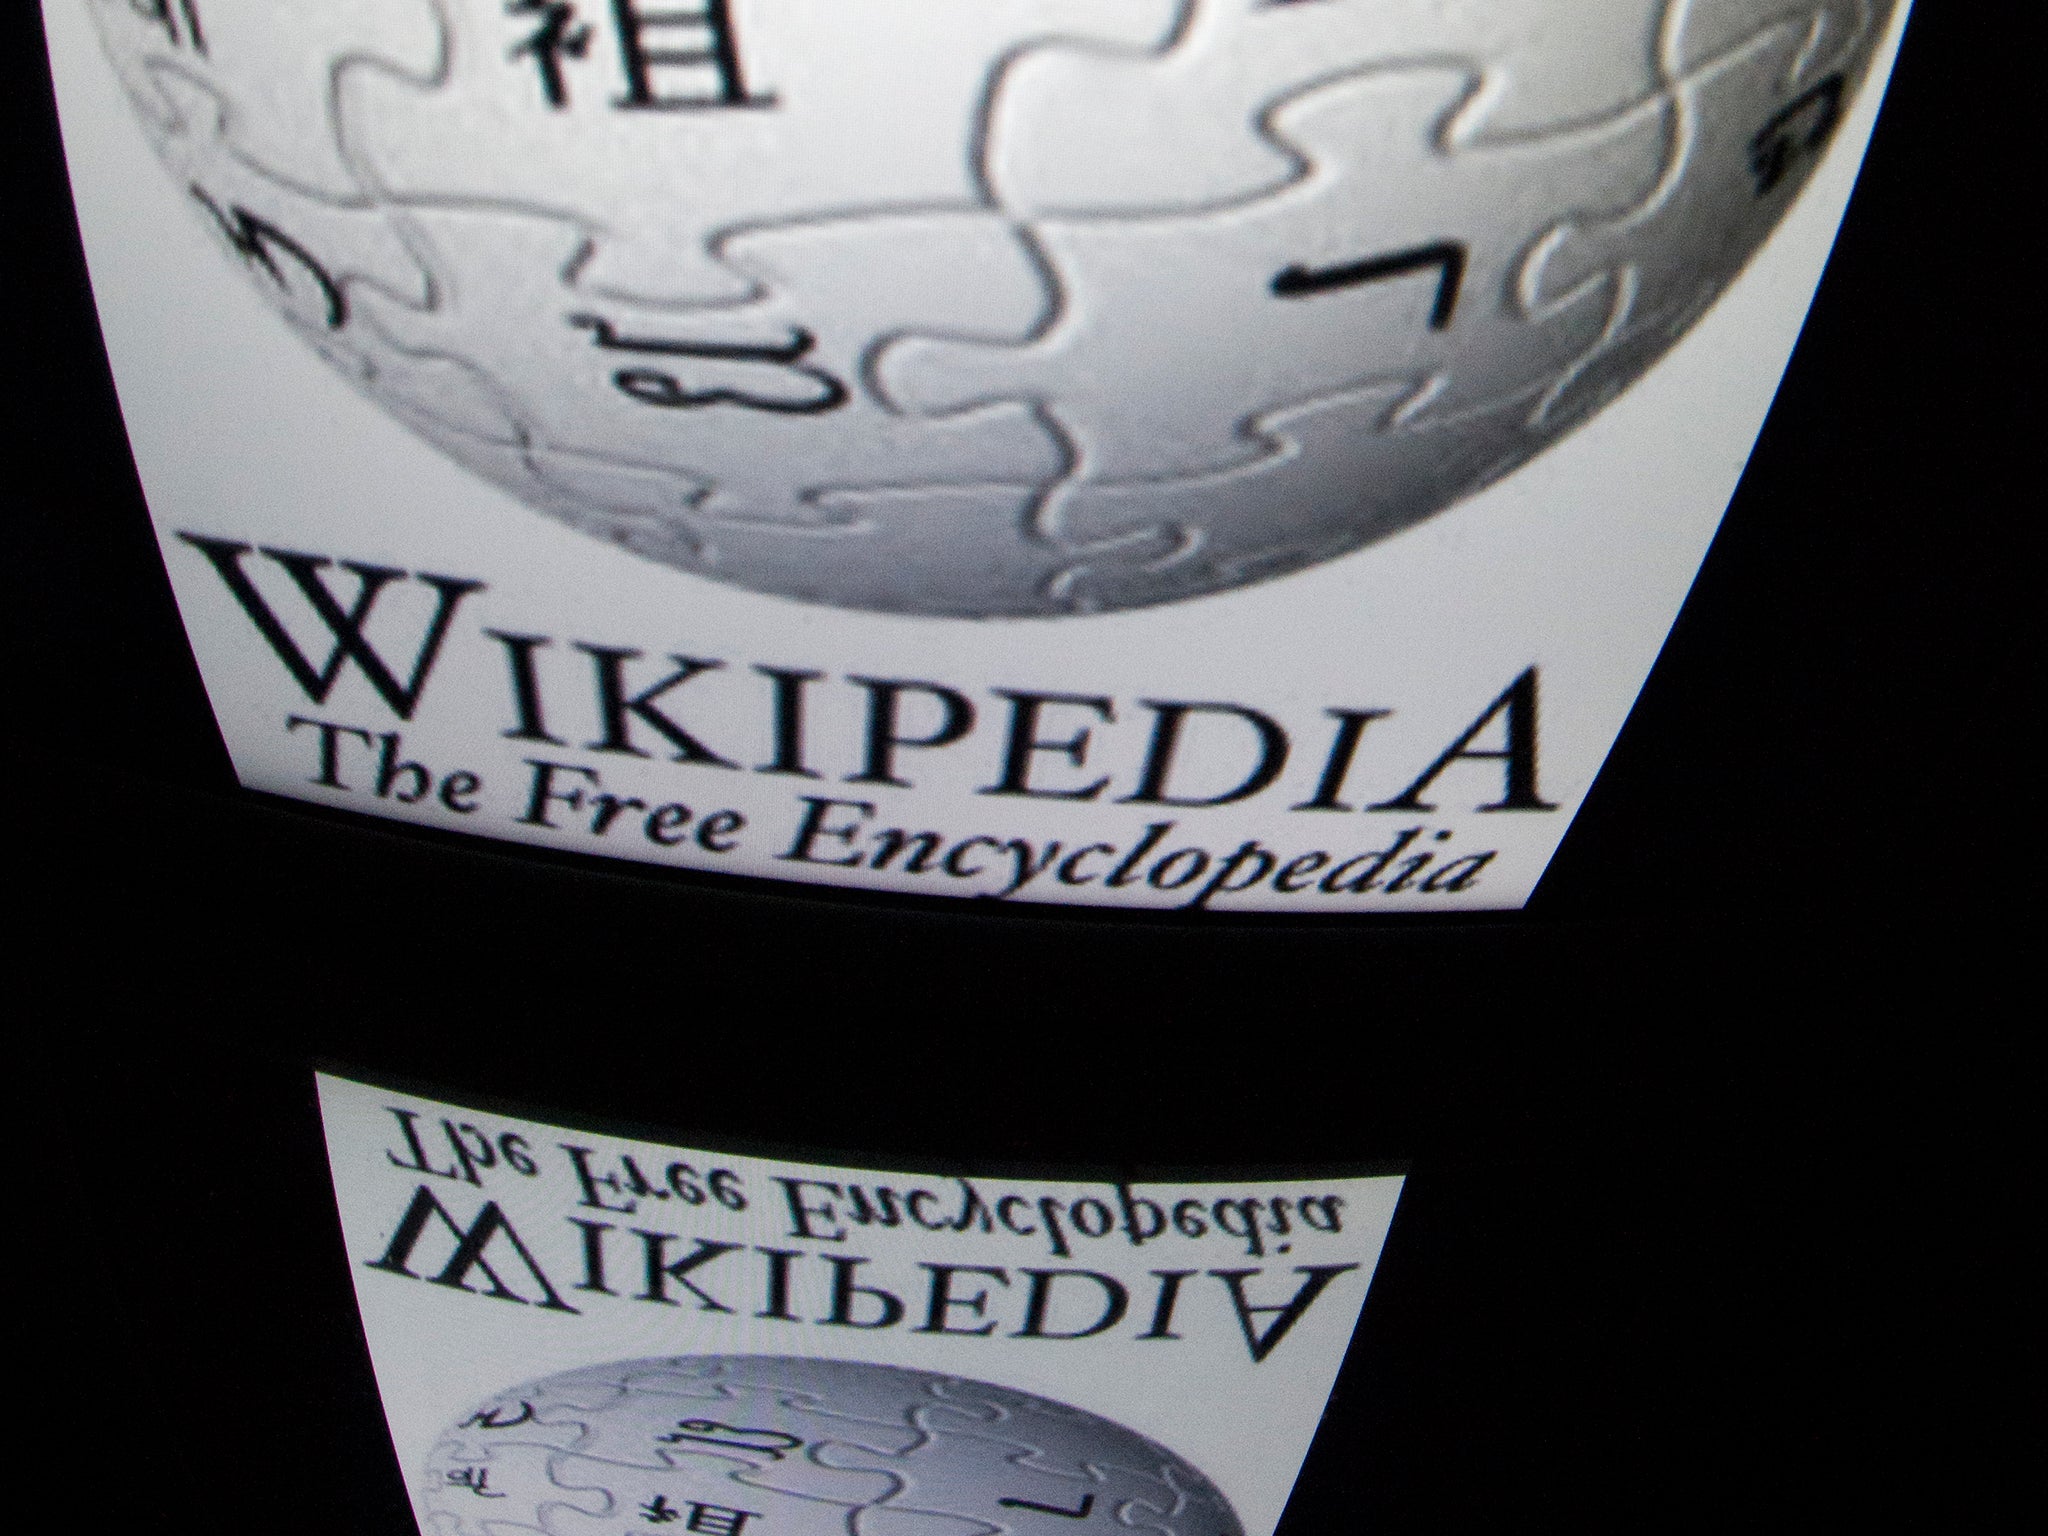 The 6 most controversial edited Wikipedia pages